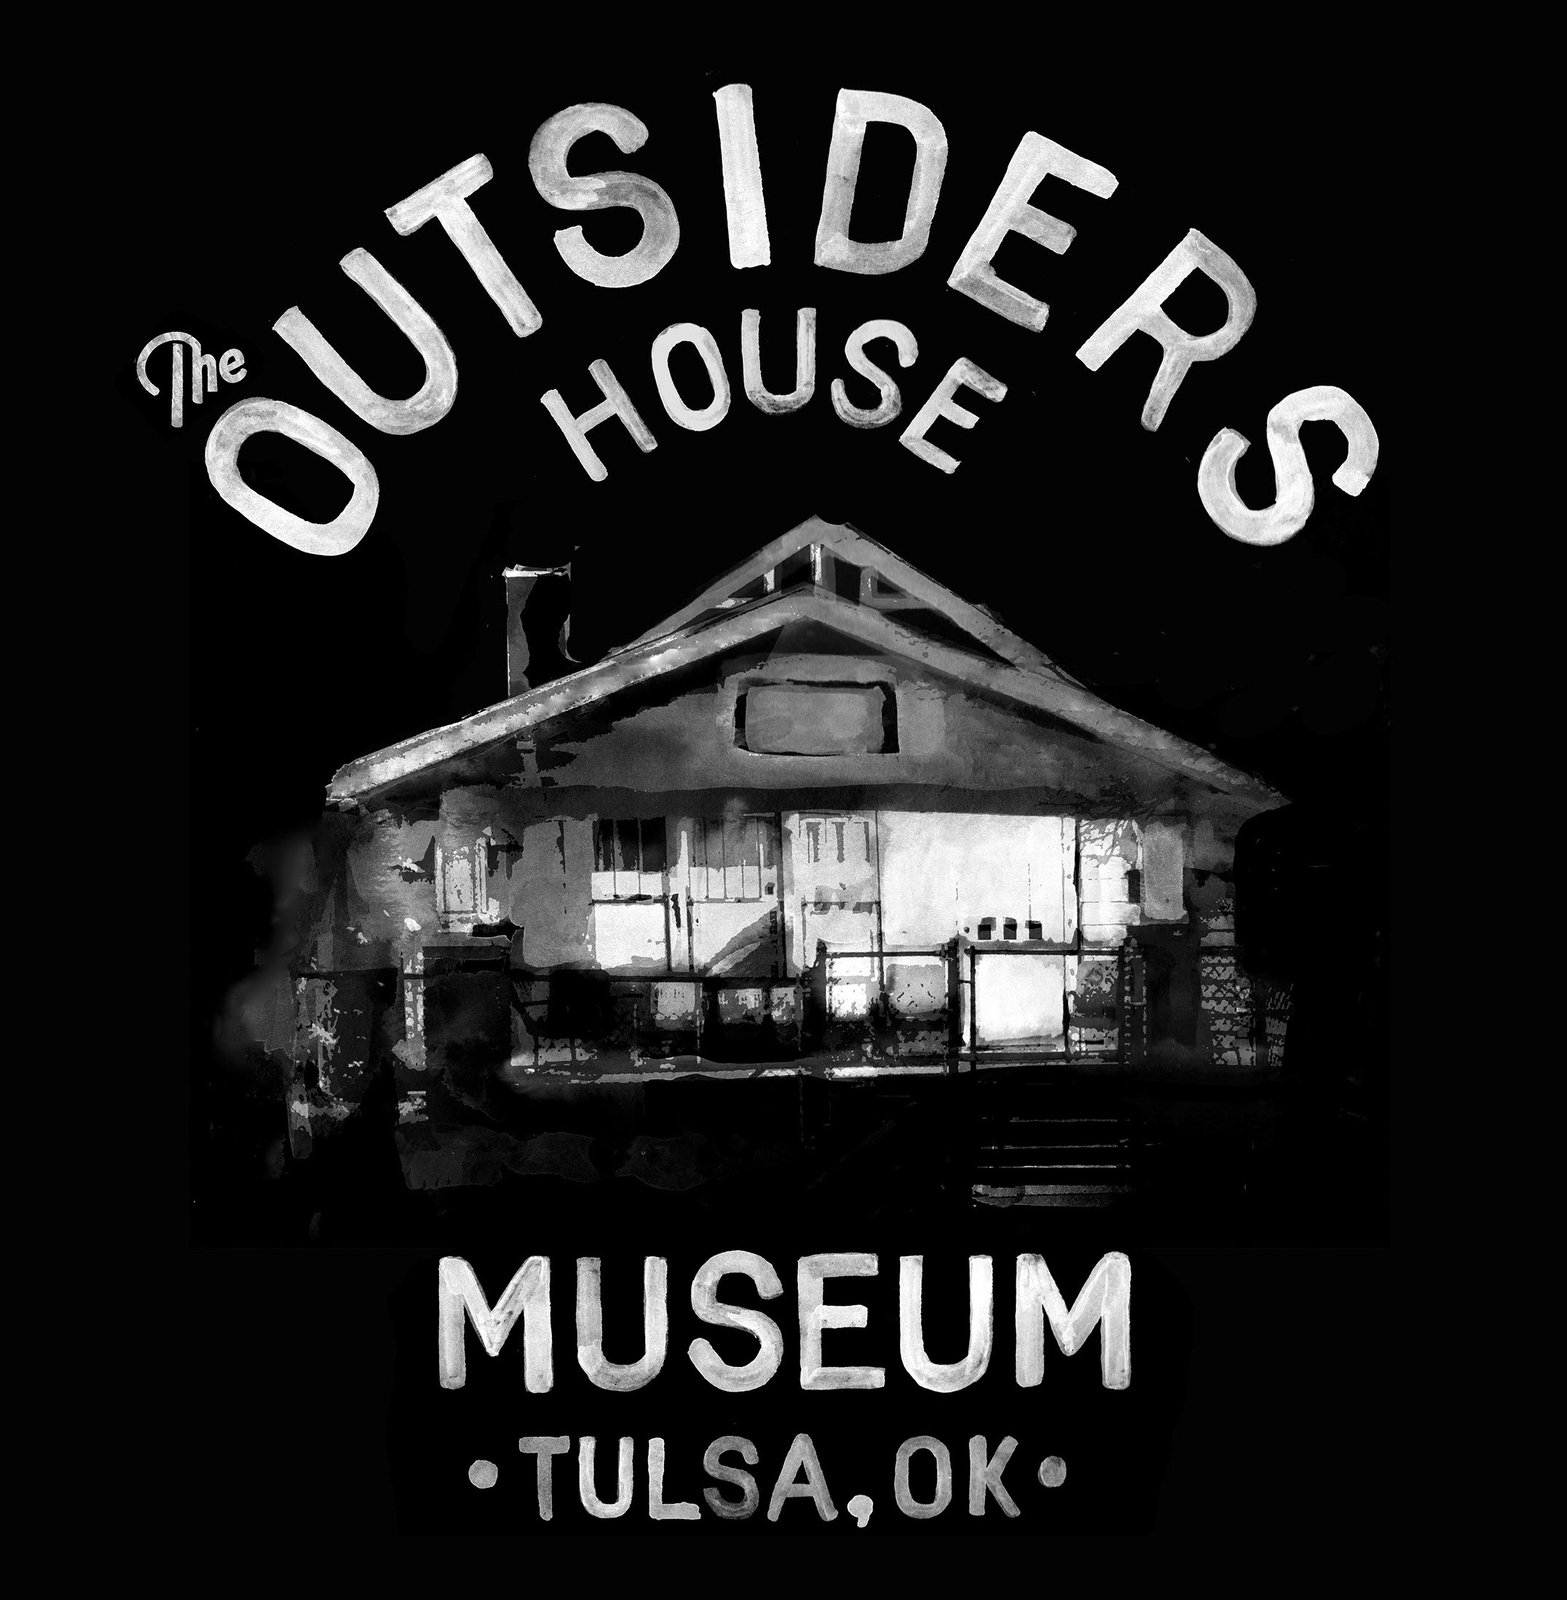 The Outsiders House Museum